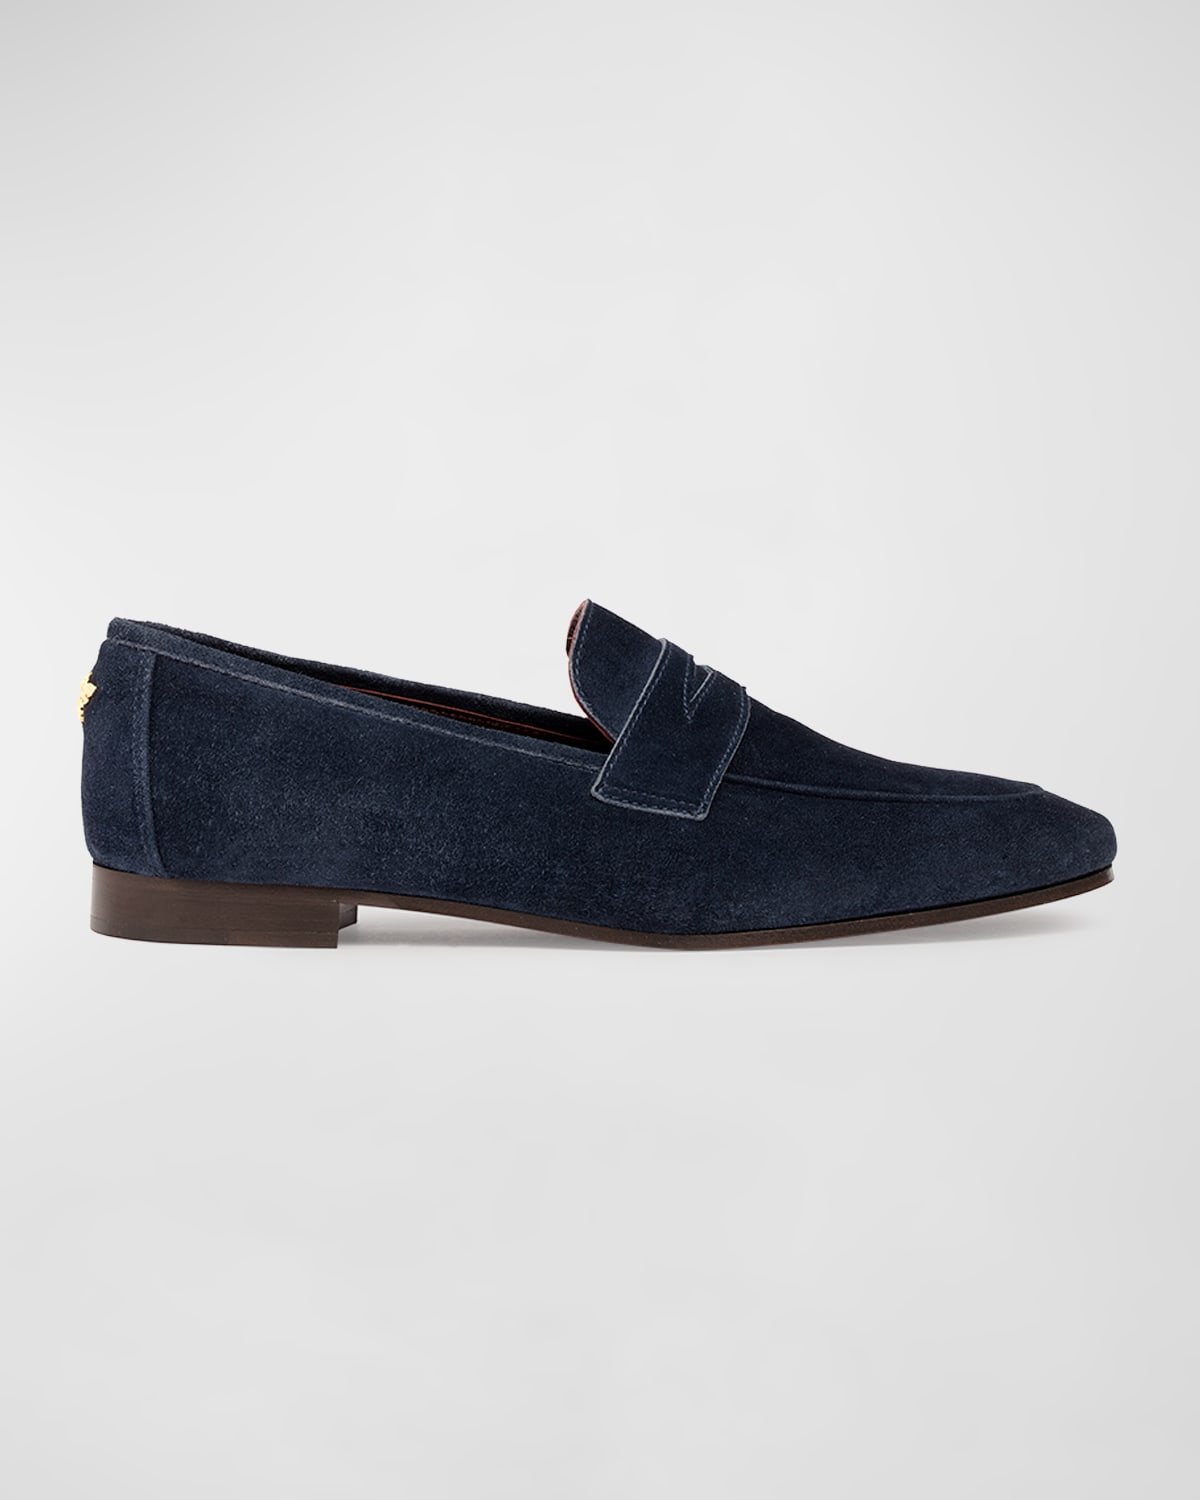 Suede Flat Penny Loafers